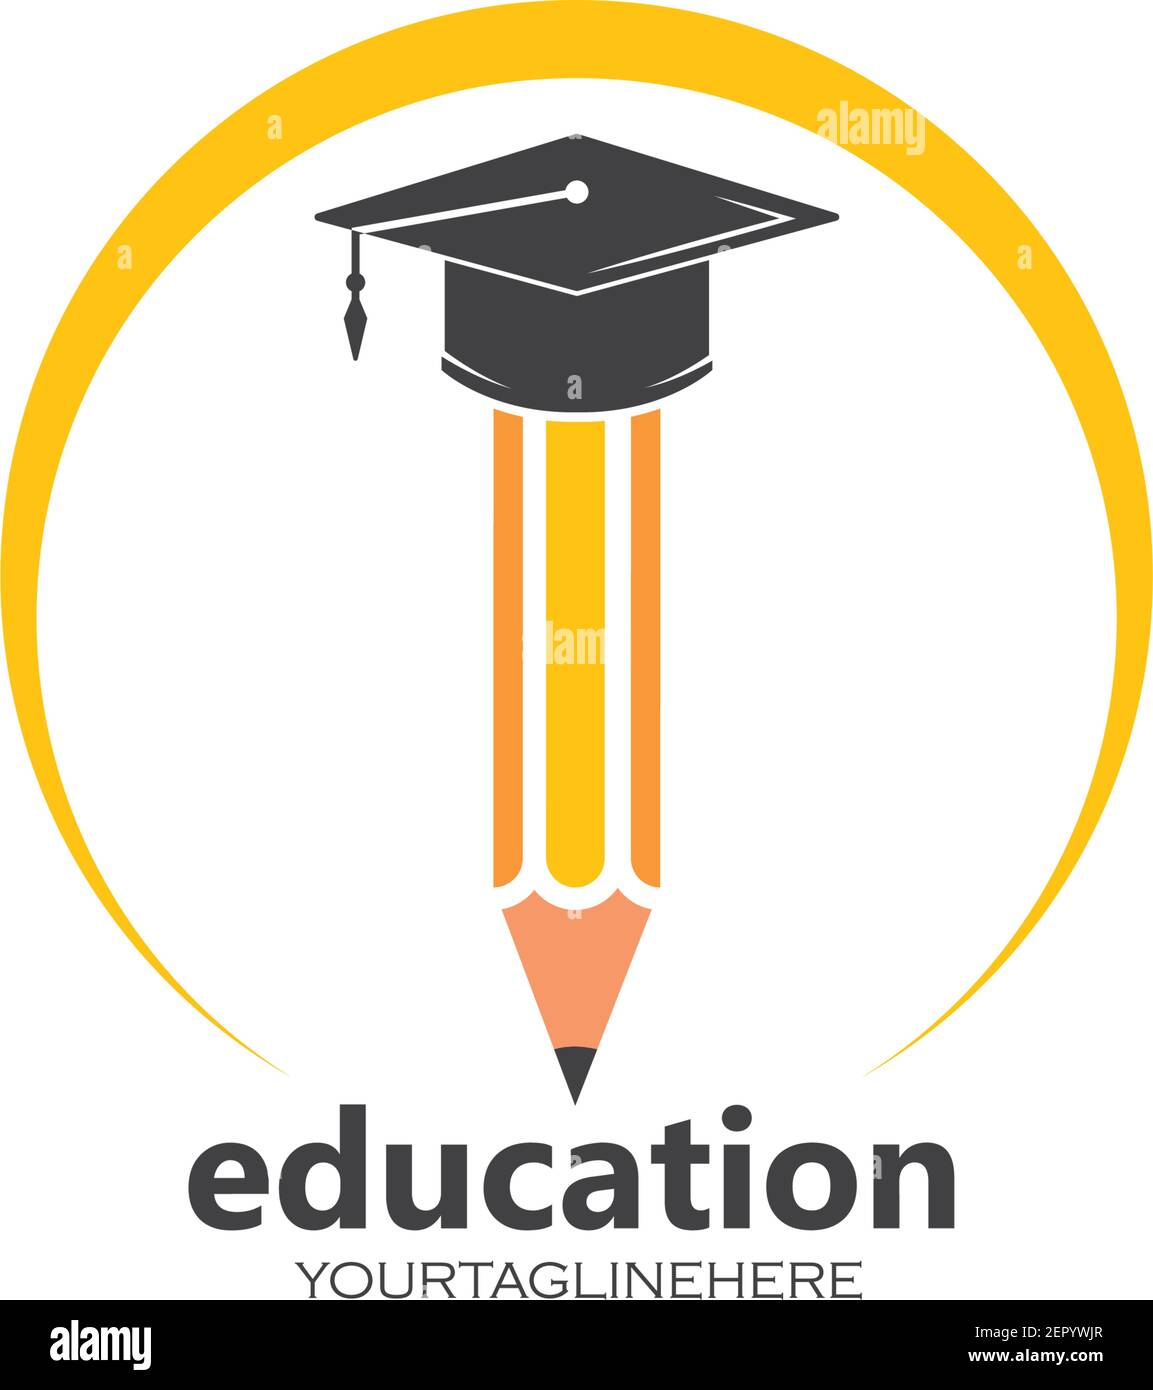 pencil vector illustration icon and logo of education design Stock ...